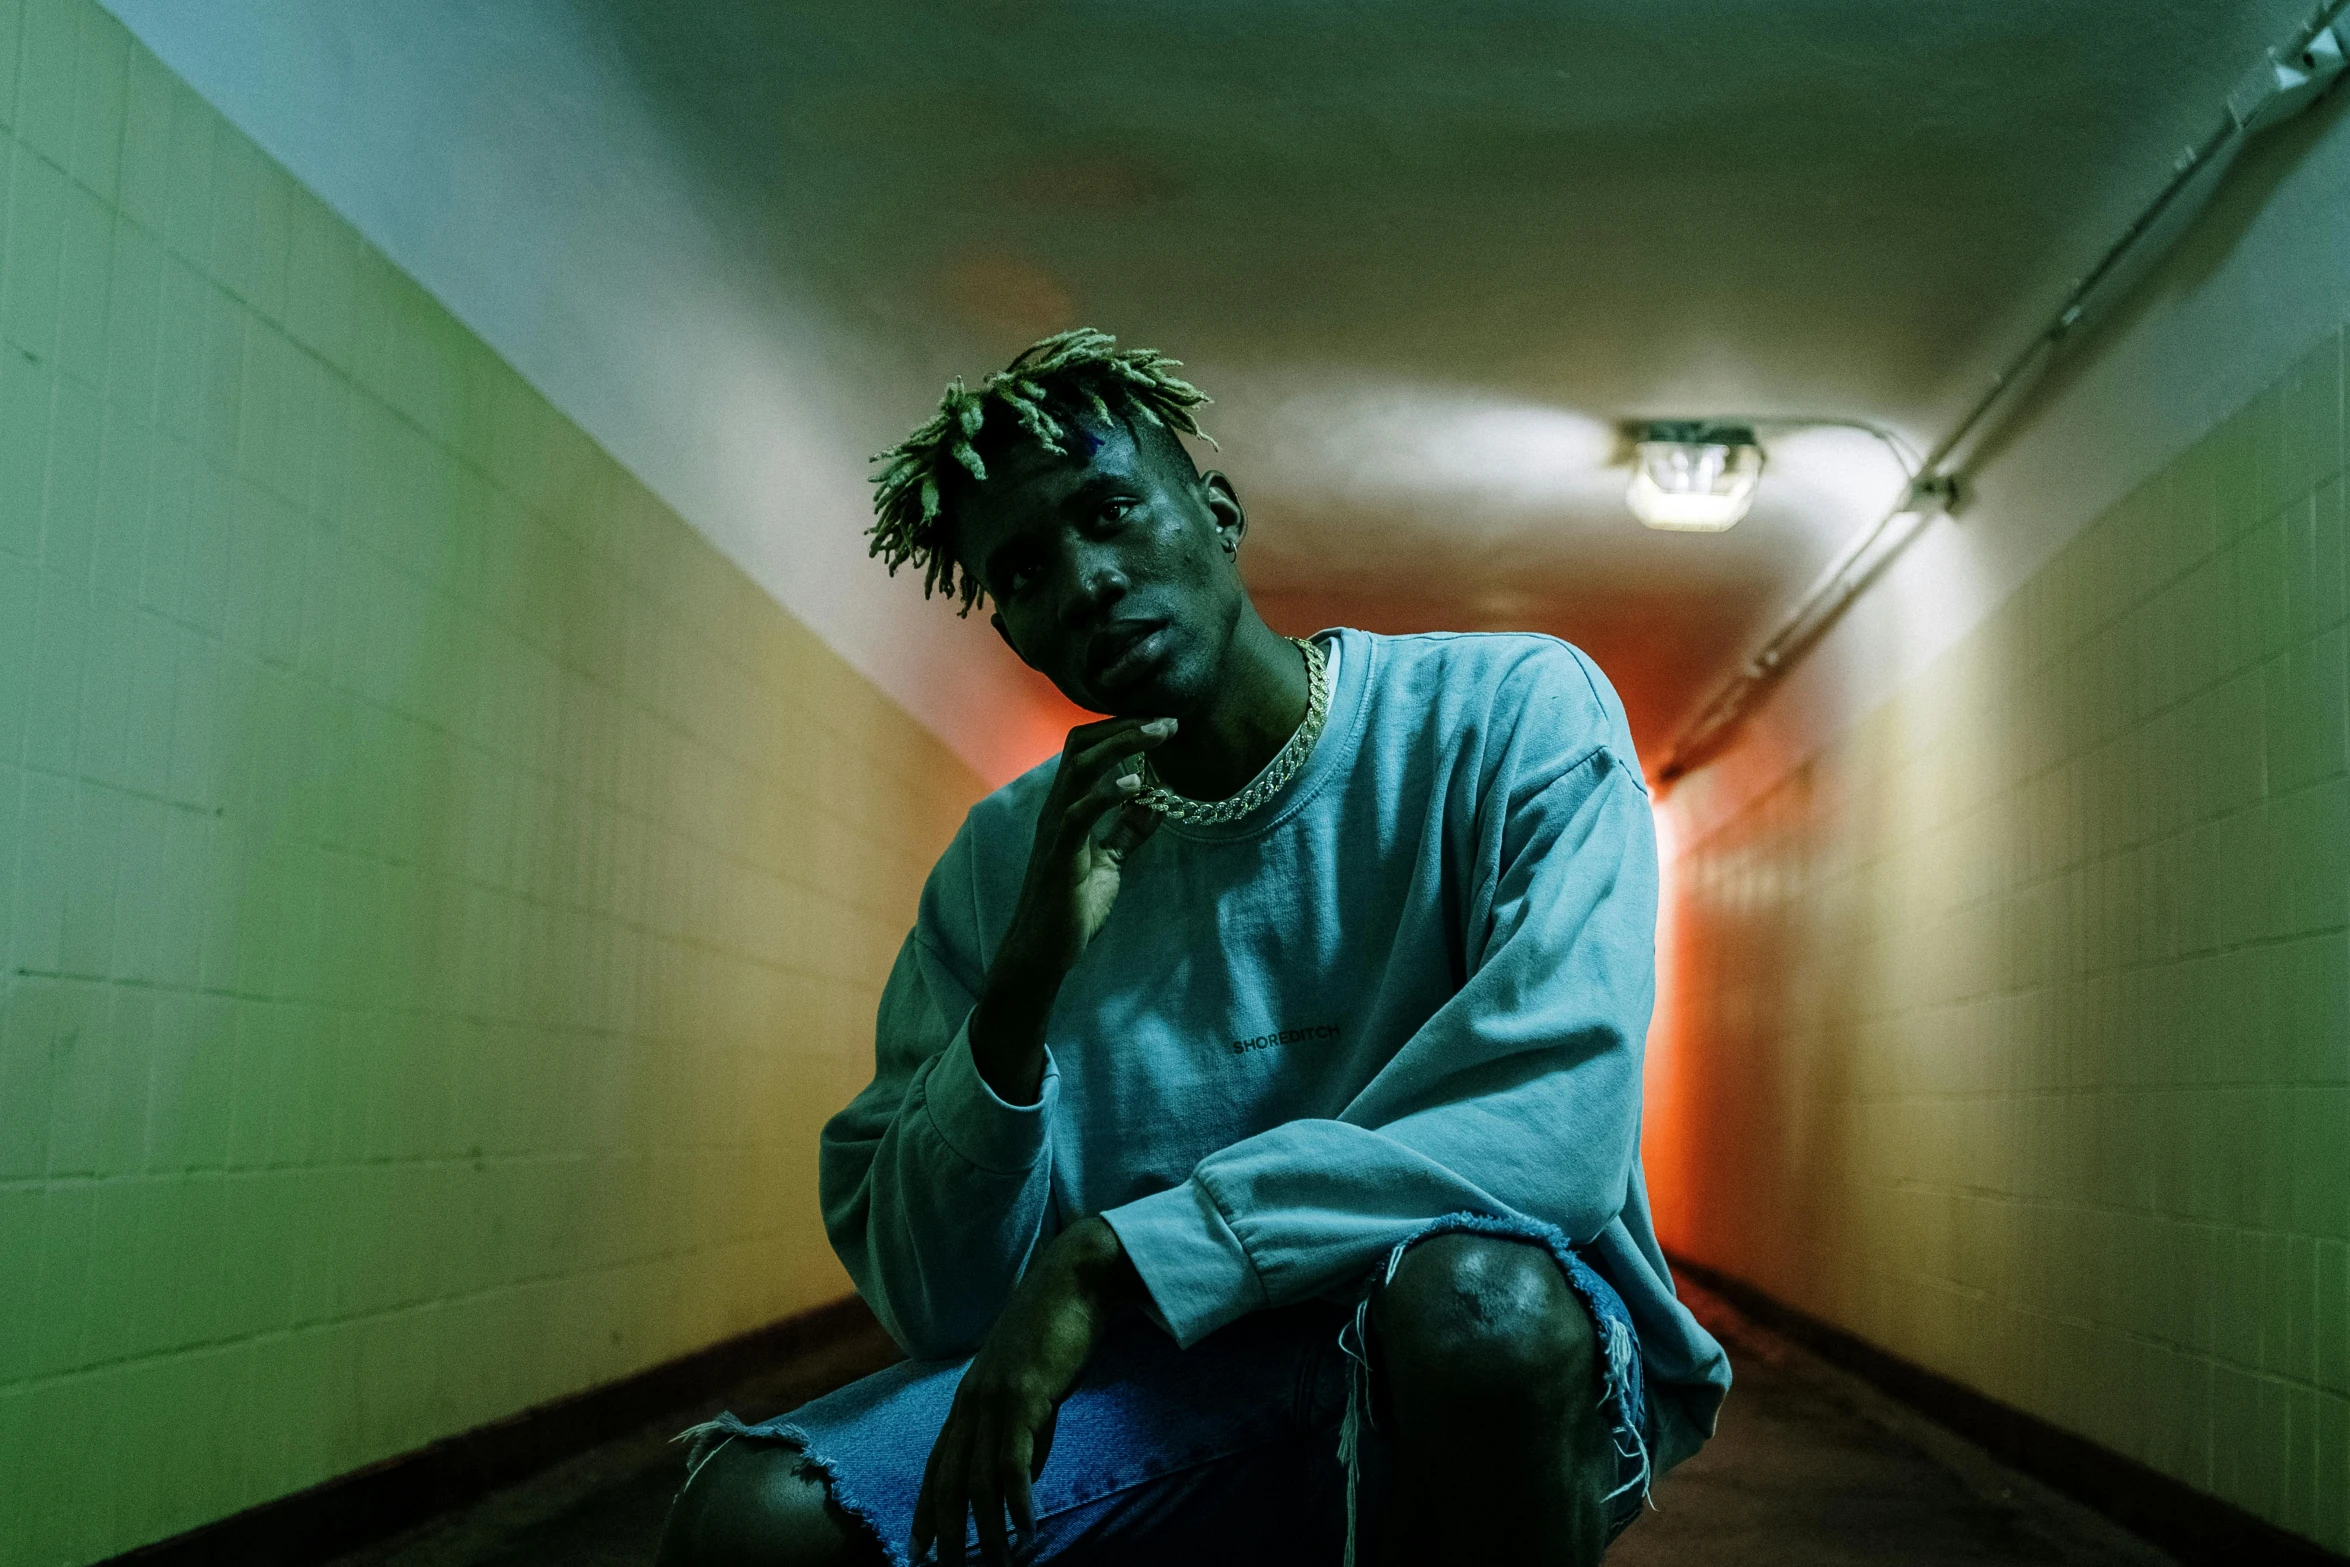 a man sitting on the ground in a hallway, an album cover, trending on pexels, visual art, xxxtentacion, hero pose colorful city lighting, with teal clothes, profile image